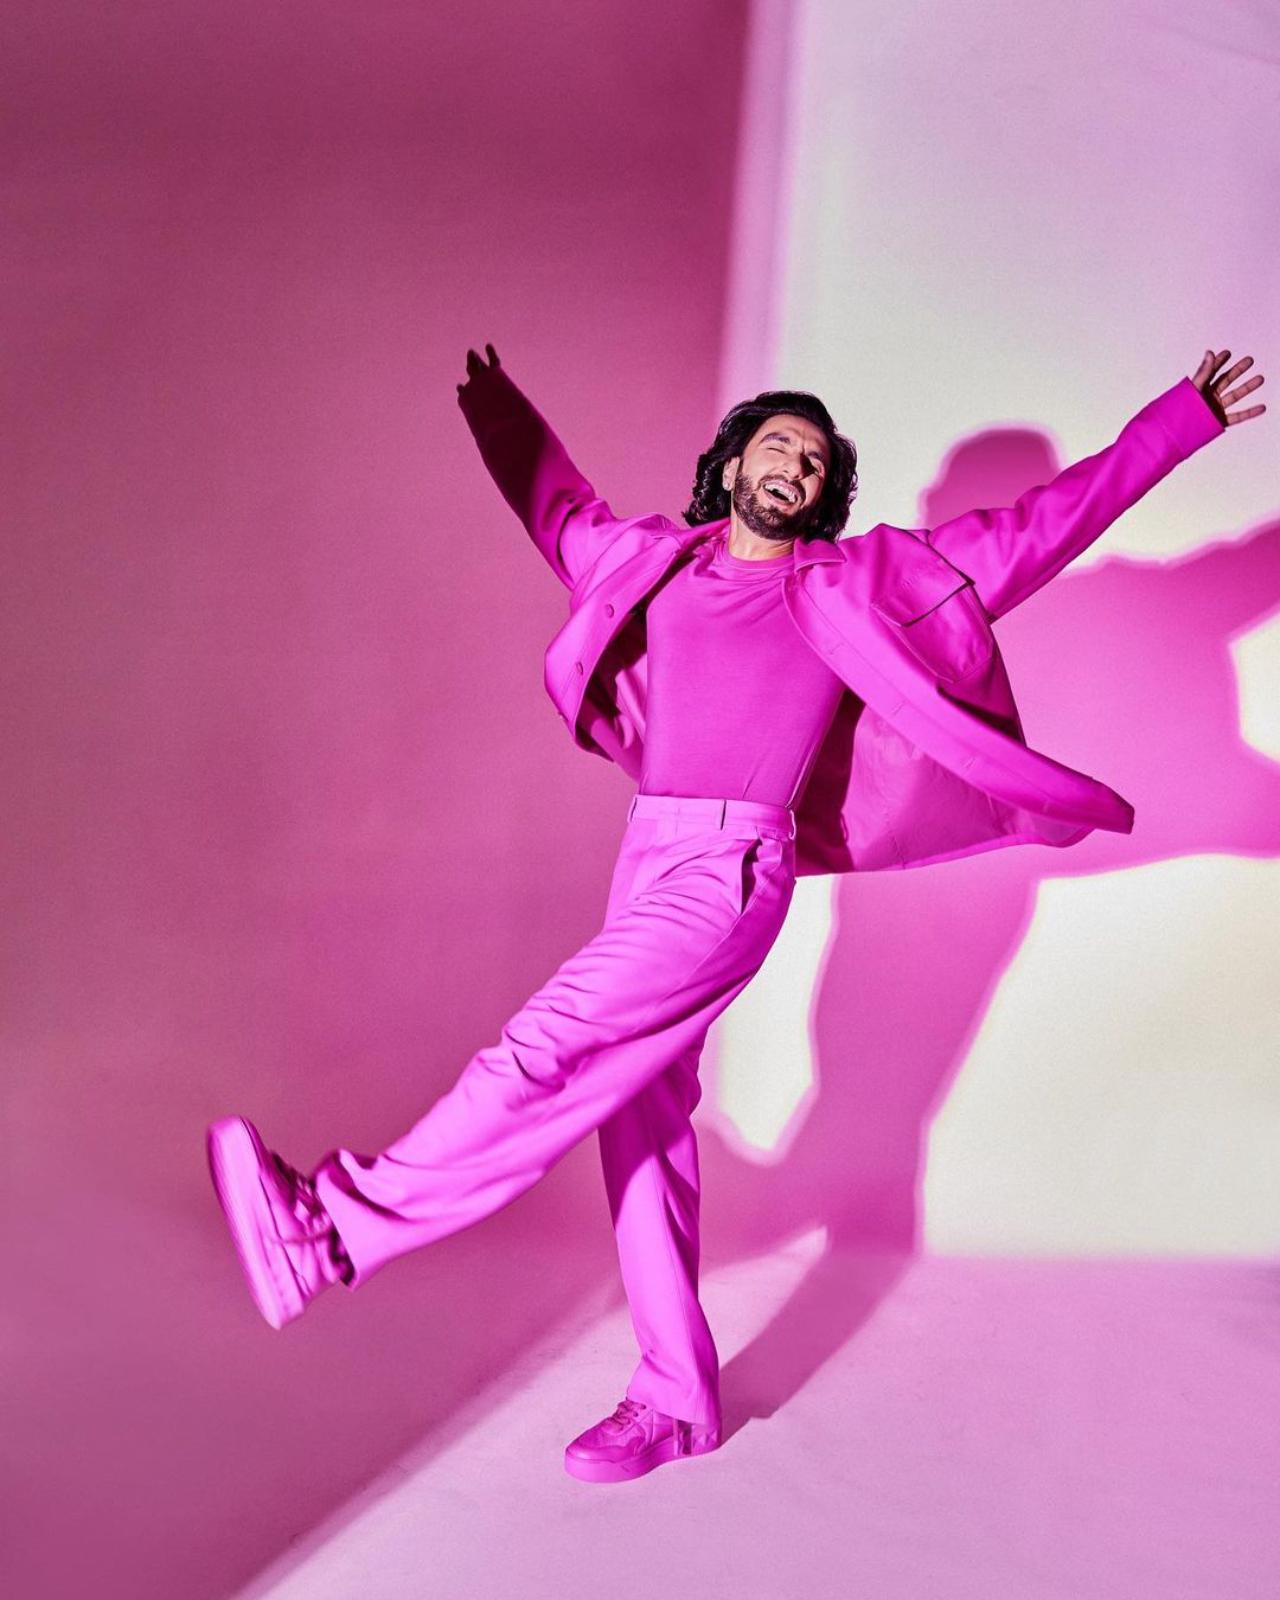 Next to his acting skills, Ranveer Singh makes headlines for his quirky sense of fashion. For a event this week, Ranveer Singh opted for an all-pink outfit, the bright kind. And needless to say, the actor very conveniently pulled of the look. Even his shoes matched his oversized fuschia pink blazer and loose trousers